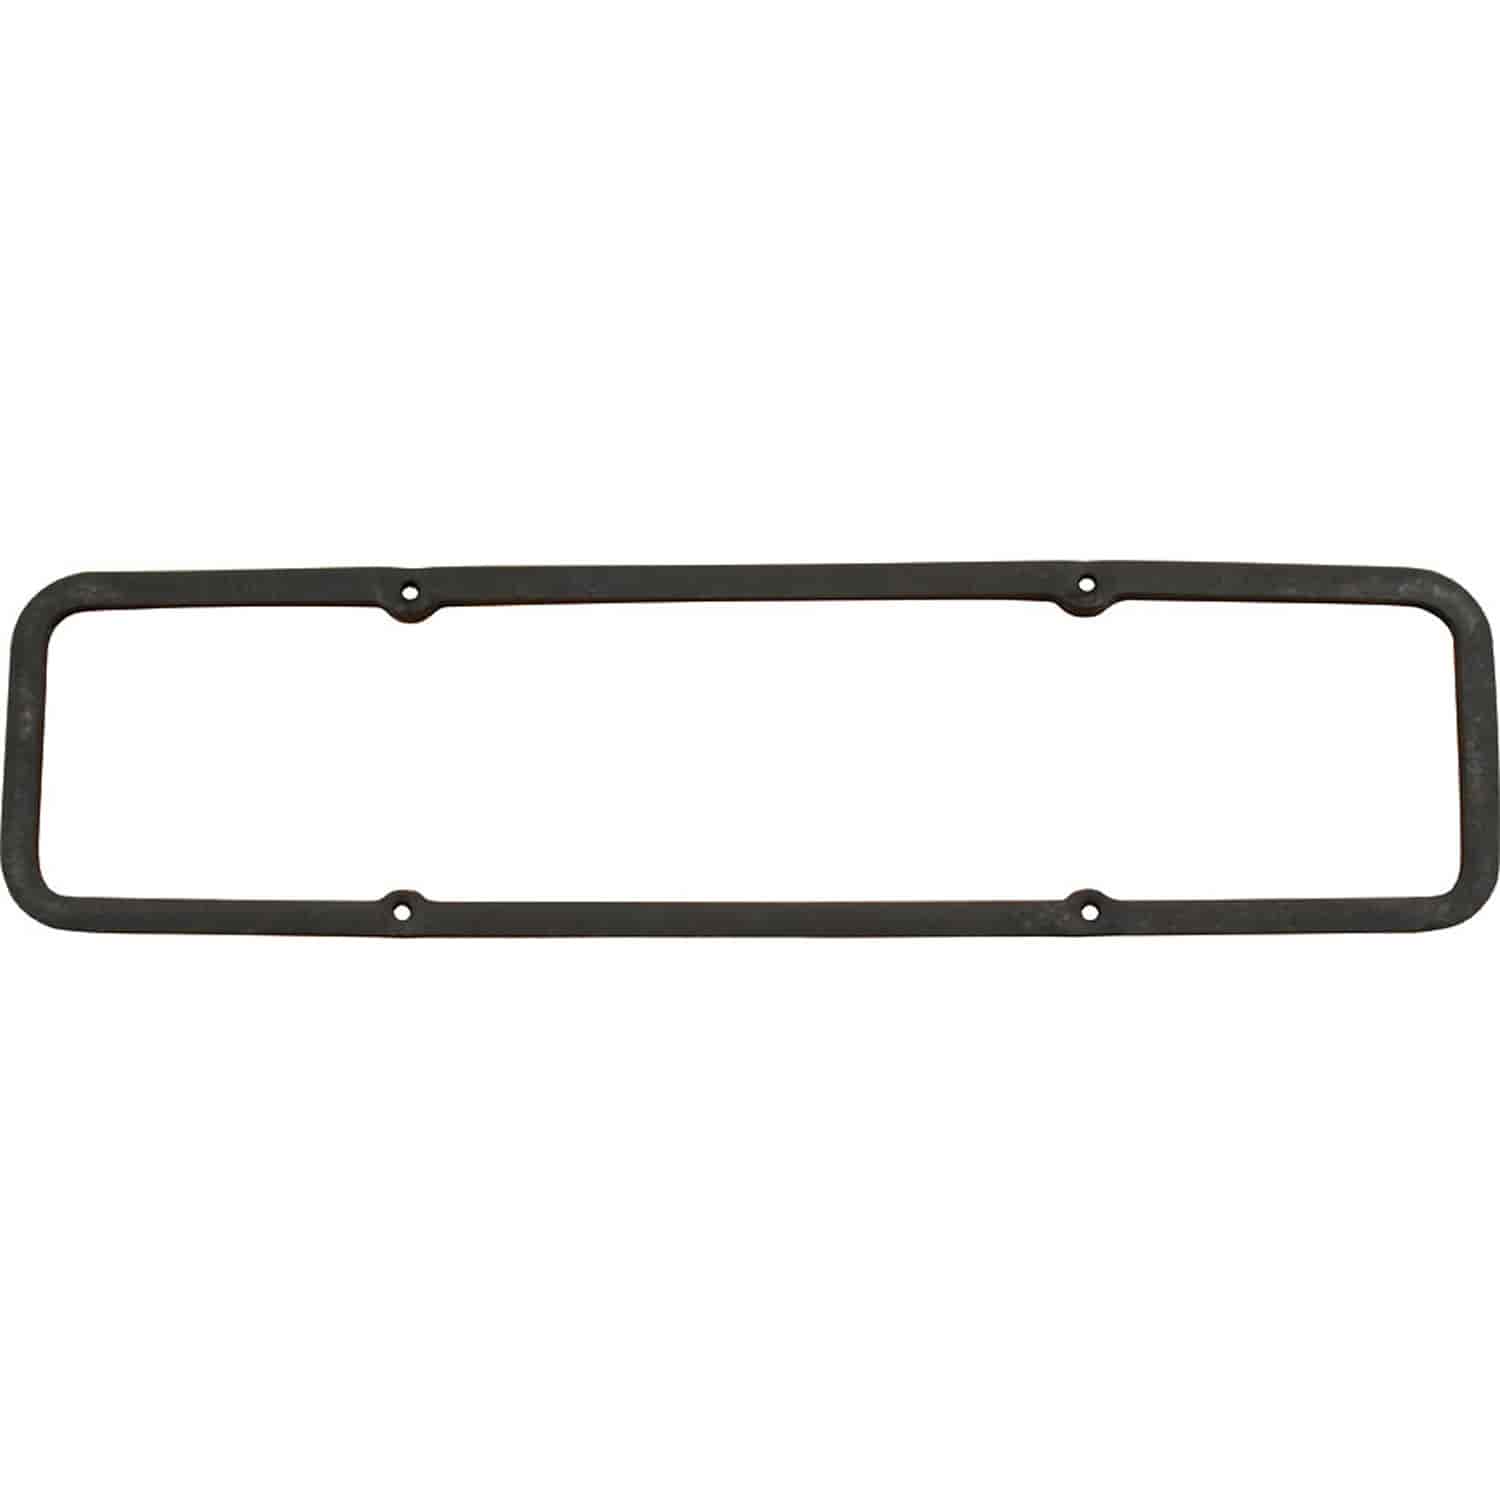 Small Block Chevy Valve Cover Gasket Thickness: 5/16"